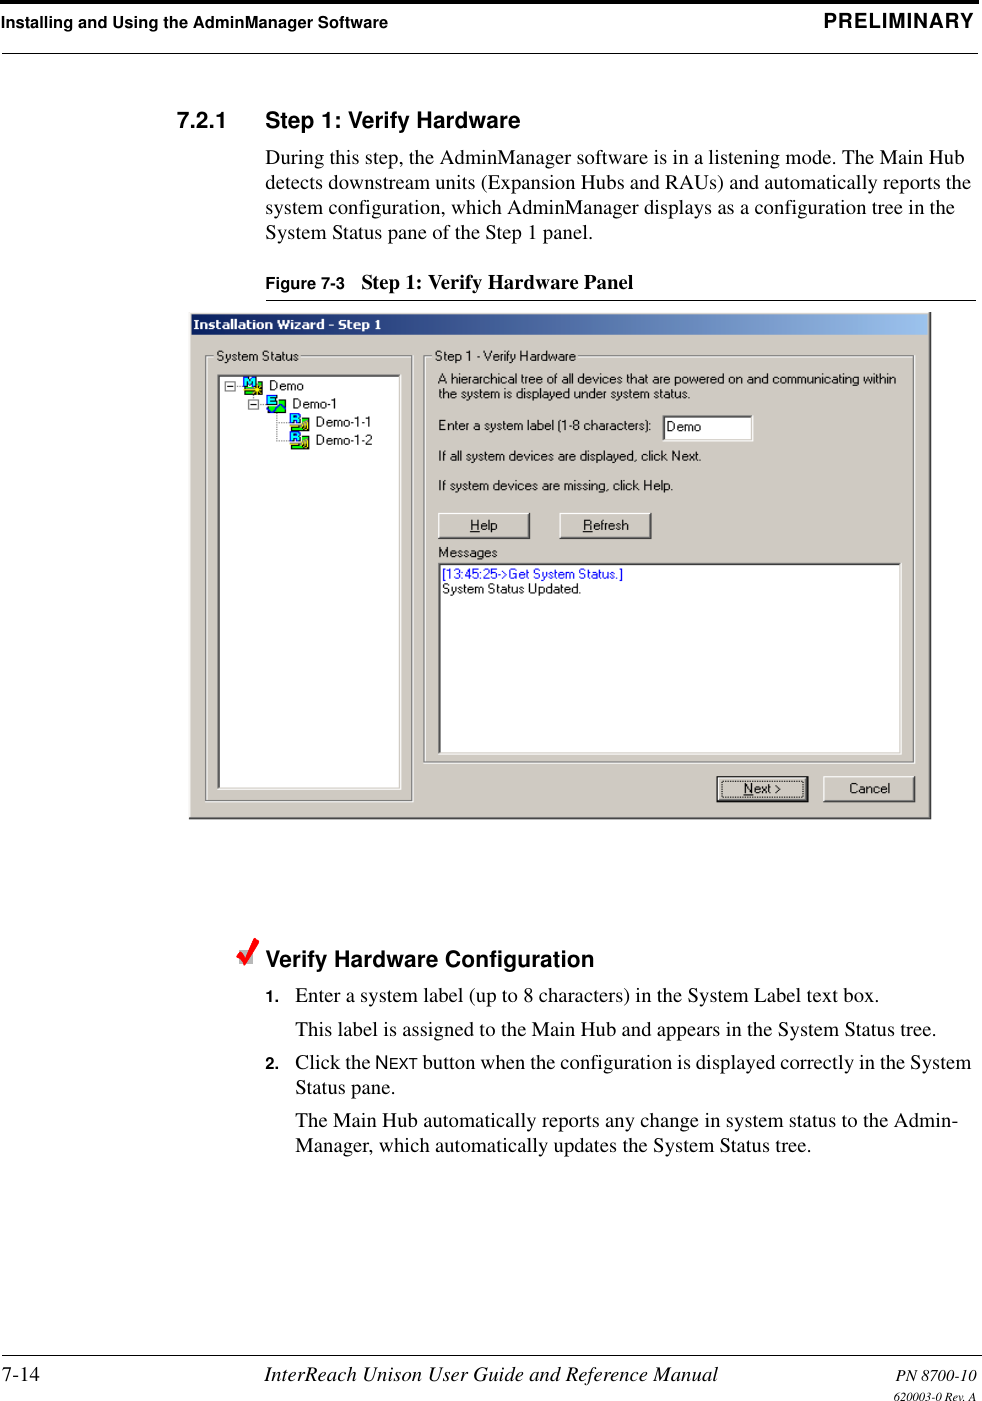 Installing and Using the AdminManager Software PRELIMINARY7-14 InterReach Unison User Guide and Reference Manual PN 8700-10620003-0 Rev. A7.2.1 Step 1: Verify HardwareDuring this step, the AdminManager software is in a listening mode. The Main Hub detects downstream units (Expansion Hubs and RAUs) and automatically reports the system configuration, which AdminManager displays as a configuration tree in the System Status pane of the Step 1 panel.Figure 7-3 Step 1: Verify Hardware PanelVerify Hardware Configuration1. Enter a system label (up to 8 characters) in the System Label text box.This label is assigned to the Main Hub and appears in the System Status tree.2. Click the NEXT button when the configuration is displayed correctly in the System Status pane.The Main Hub automatically reports any change in system status to the Admin-Manager, which automatically updates the System Status tree.